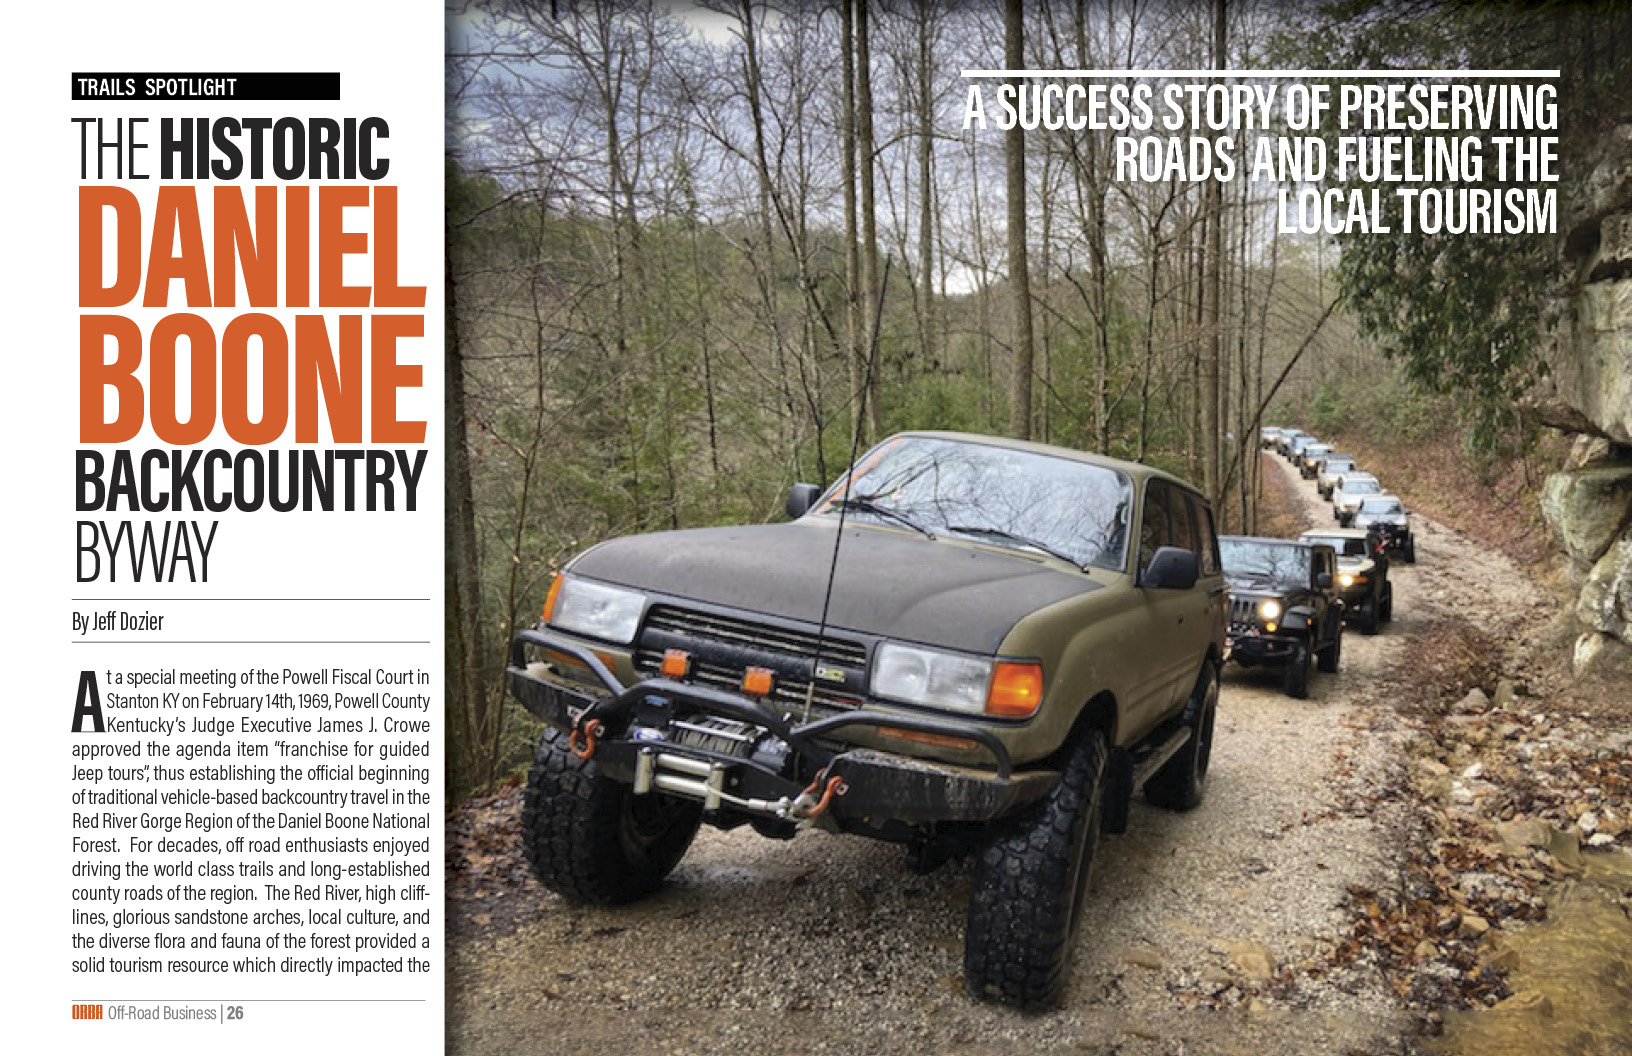 The Historic Daniel Boone Backcountry Byway